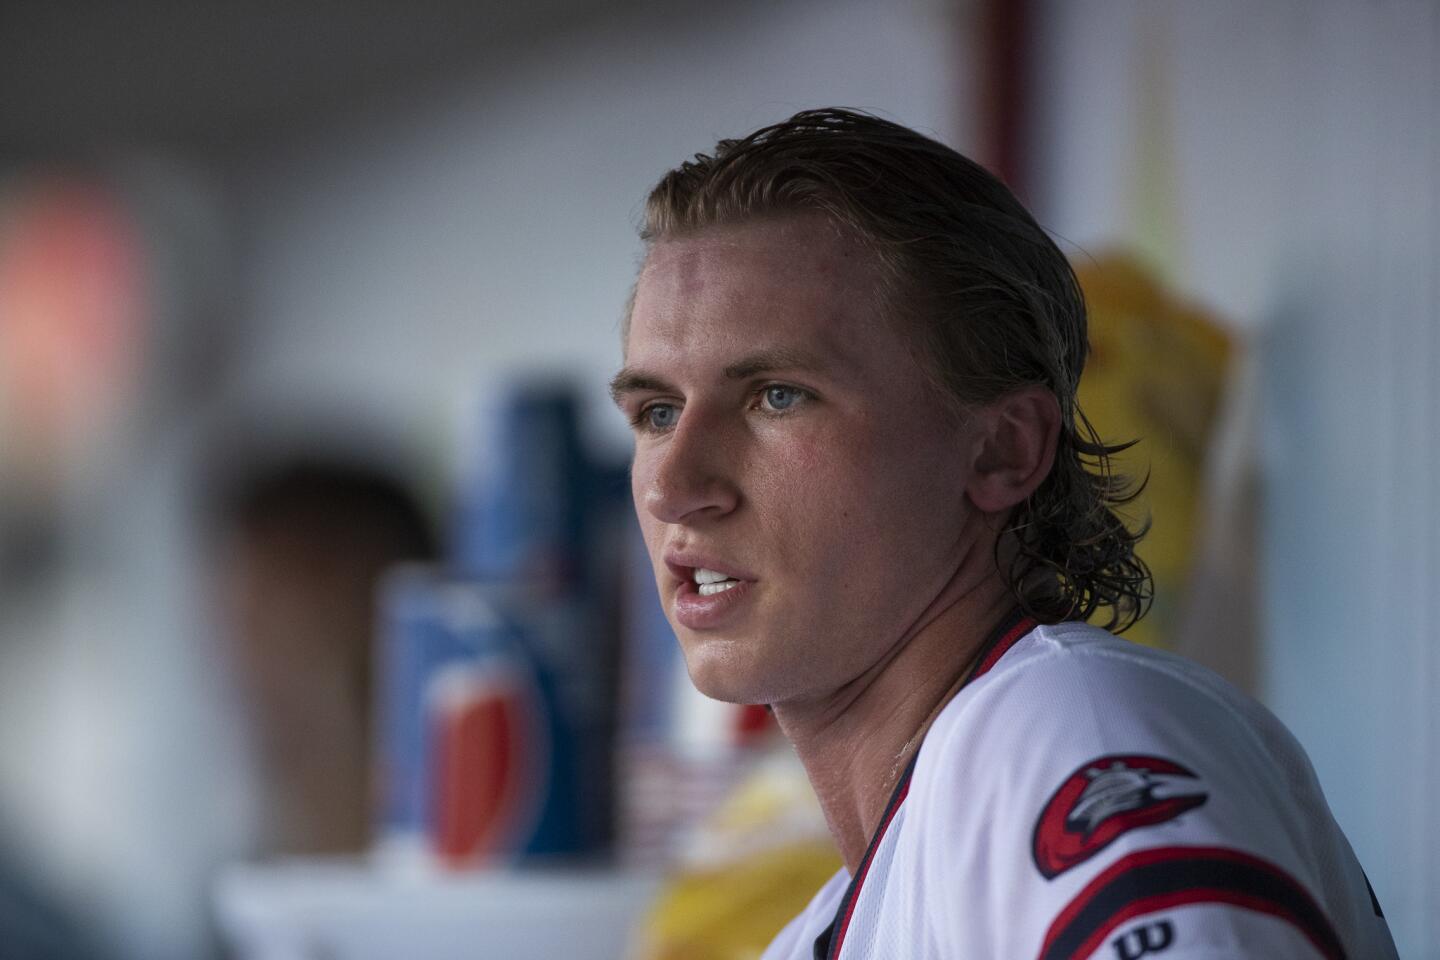 Michael Kopech catches his breath in the dugout after the first inning during a Charlotte Knights baseball game against Norfolk on Wednesday, March 23, 2018, in Charlotte, NC.